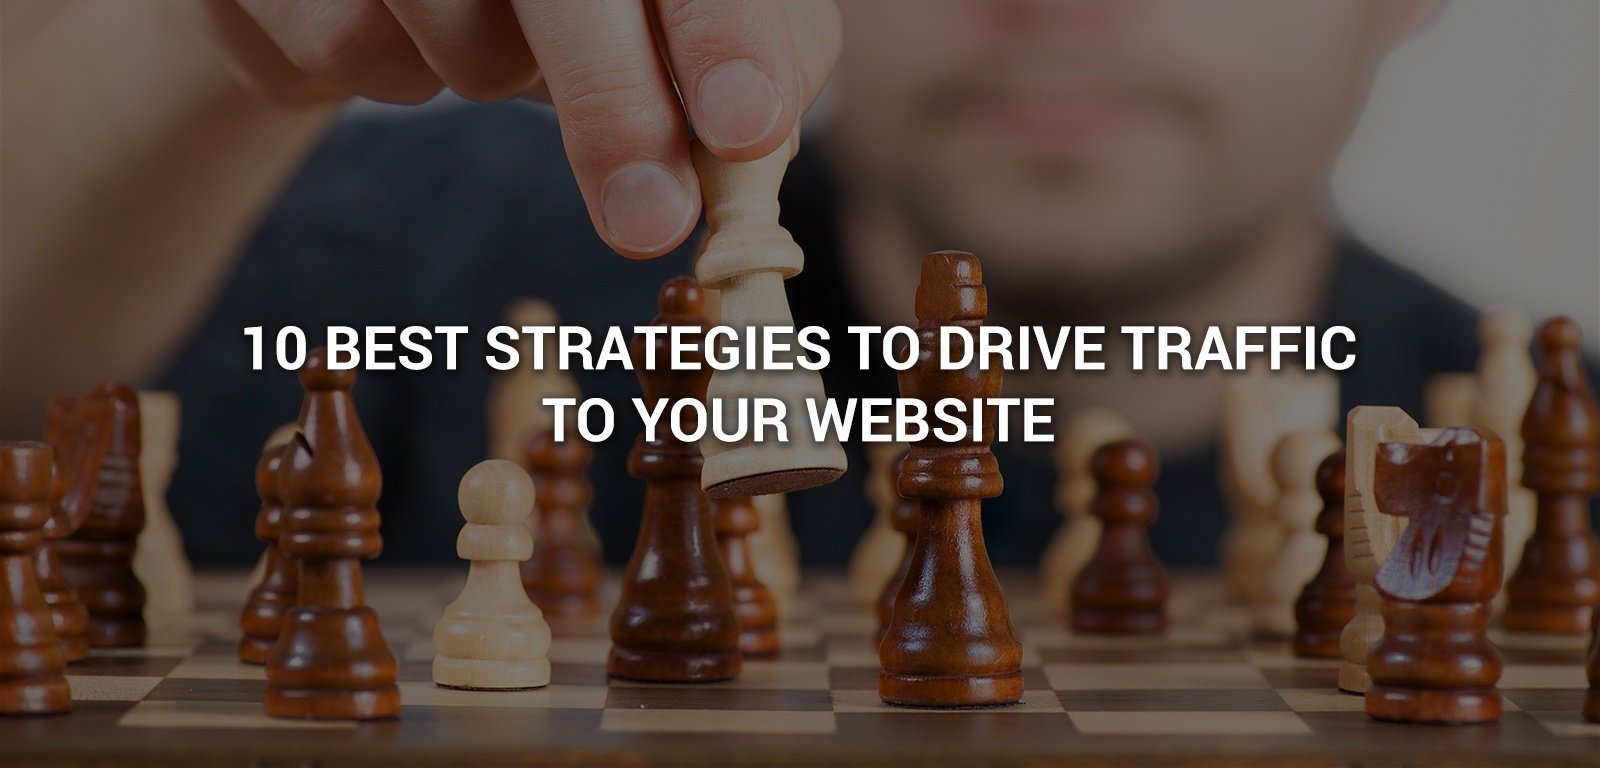 10 best strategies to drive traffic to your website